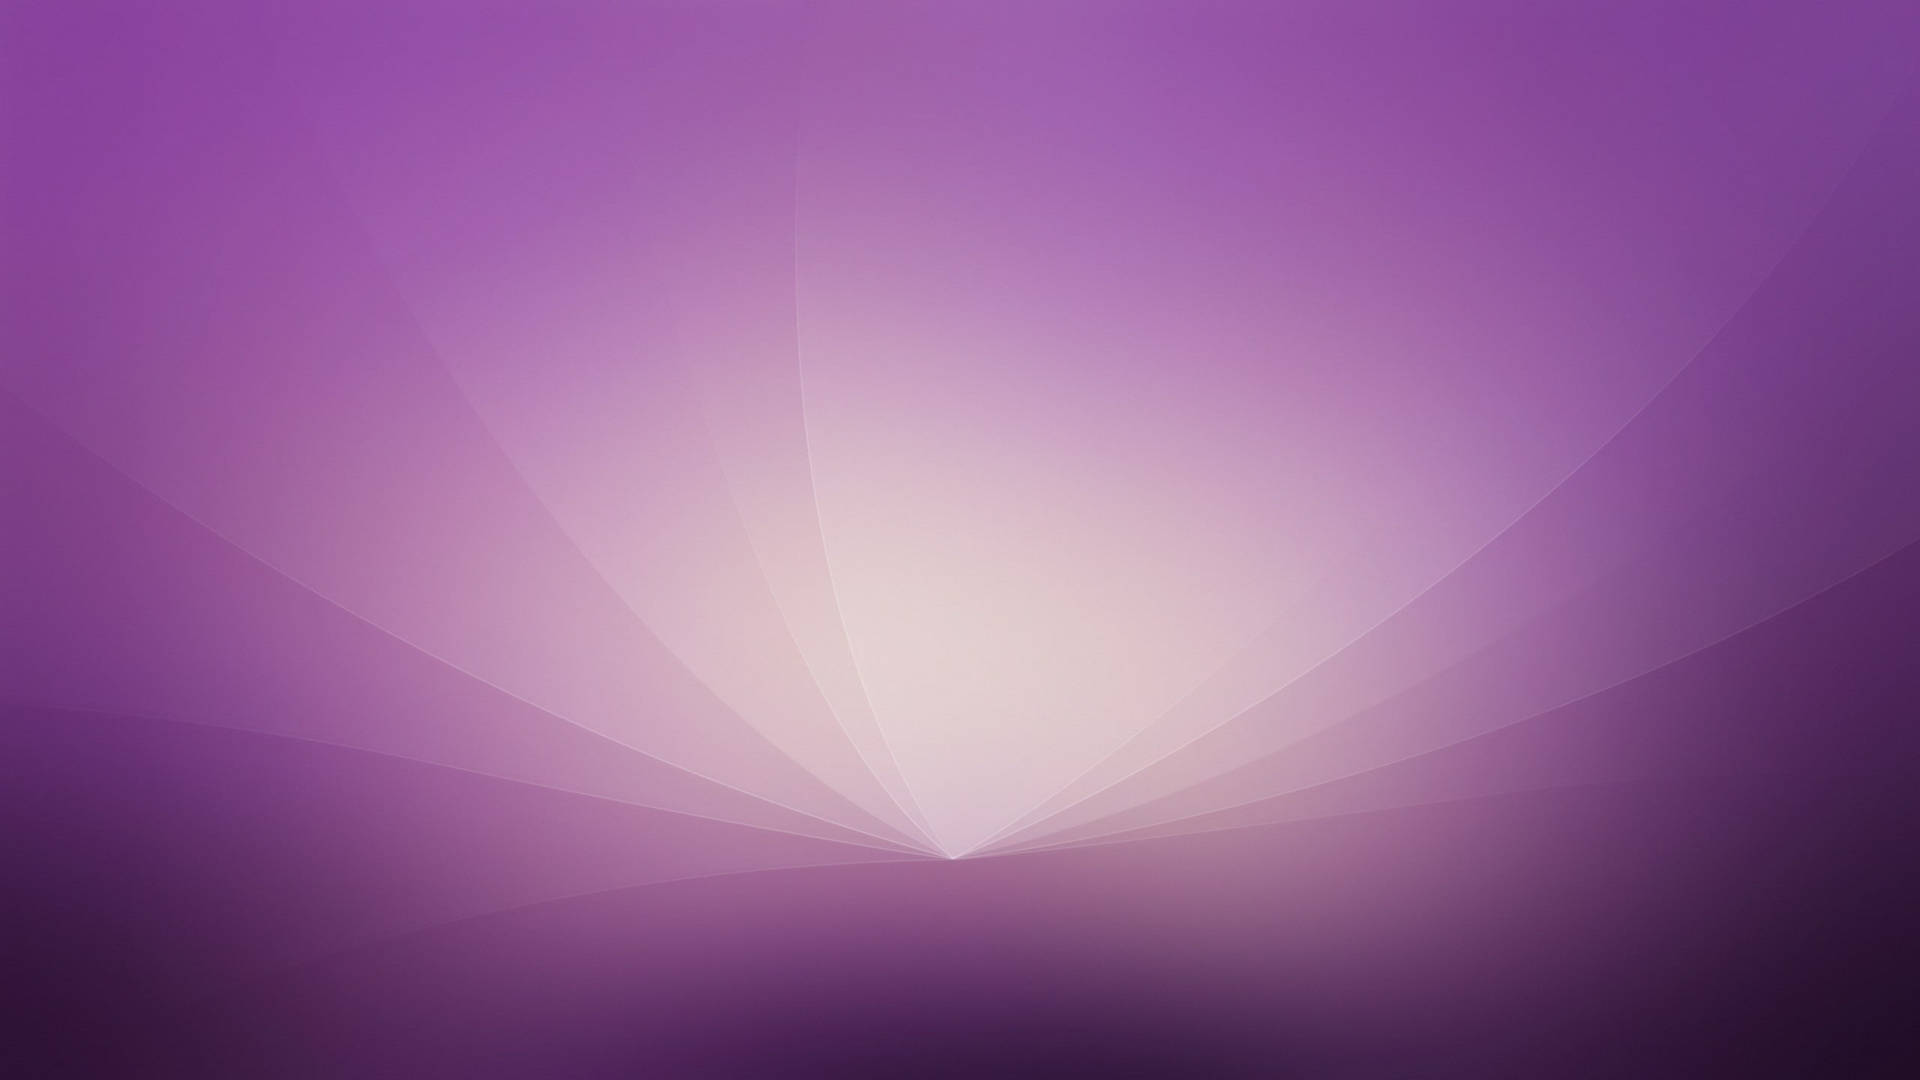 Violet Aesthetic Simple Clean Abstract